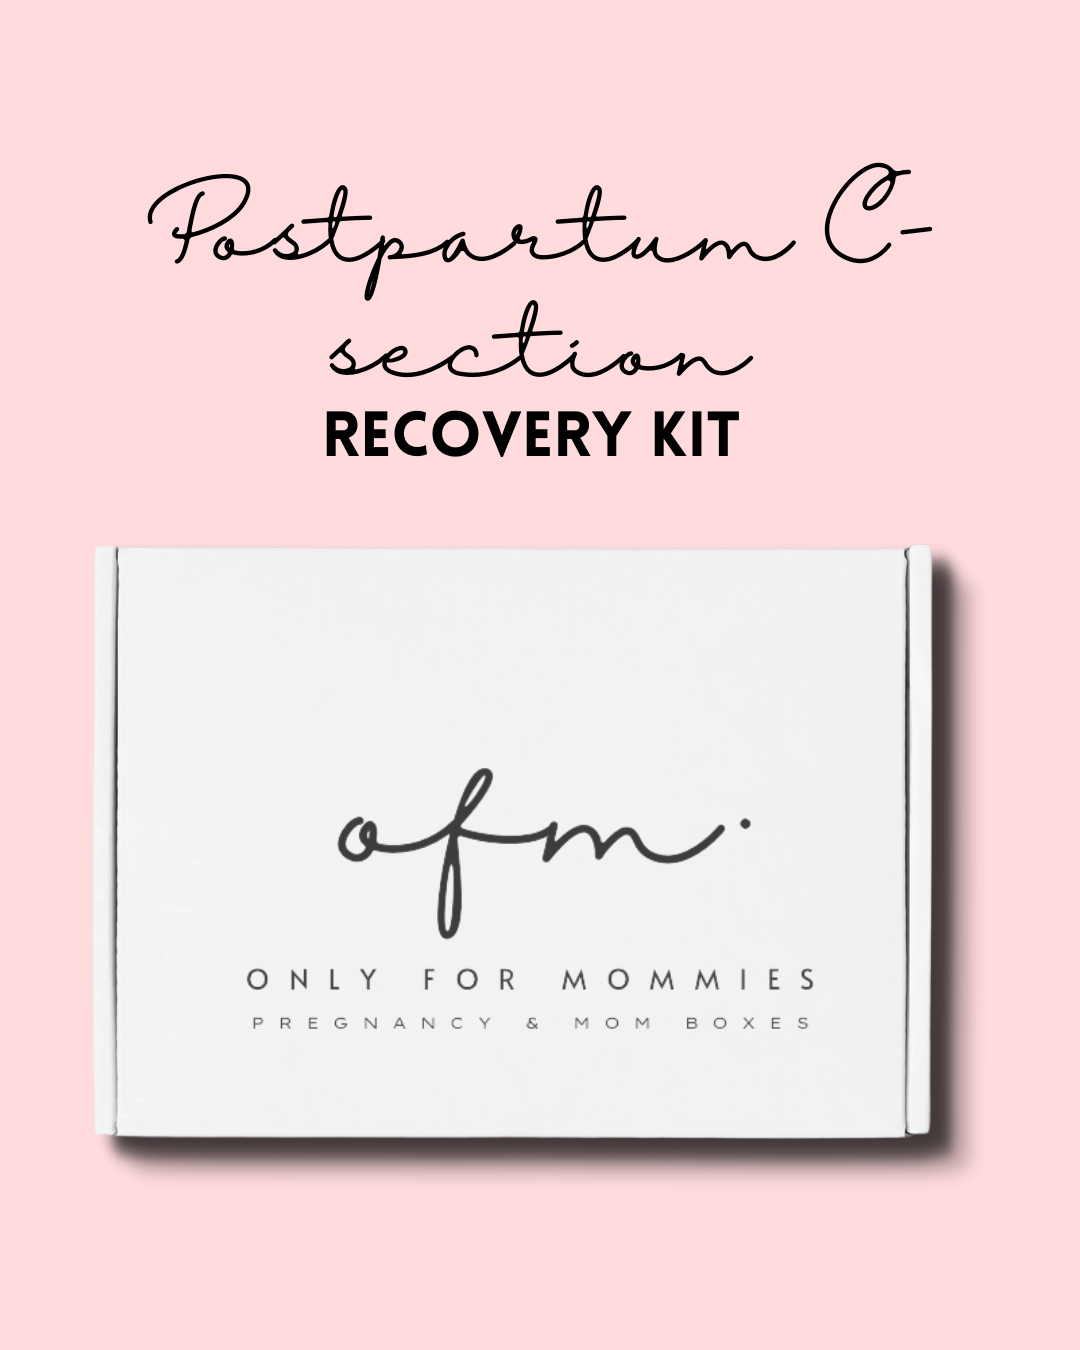 C-Section Recovery Kit